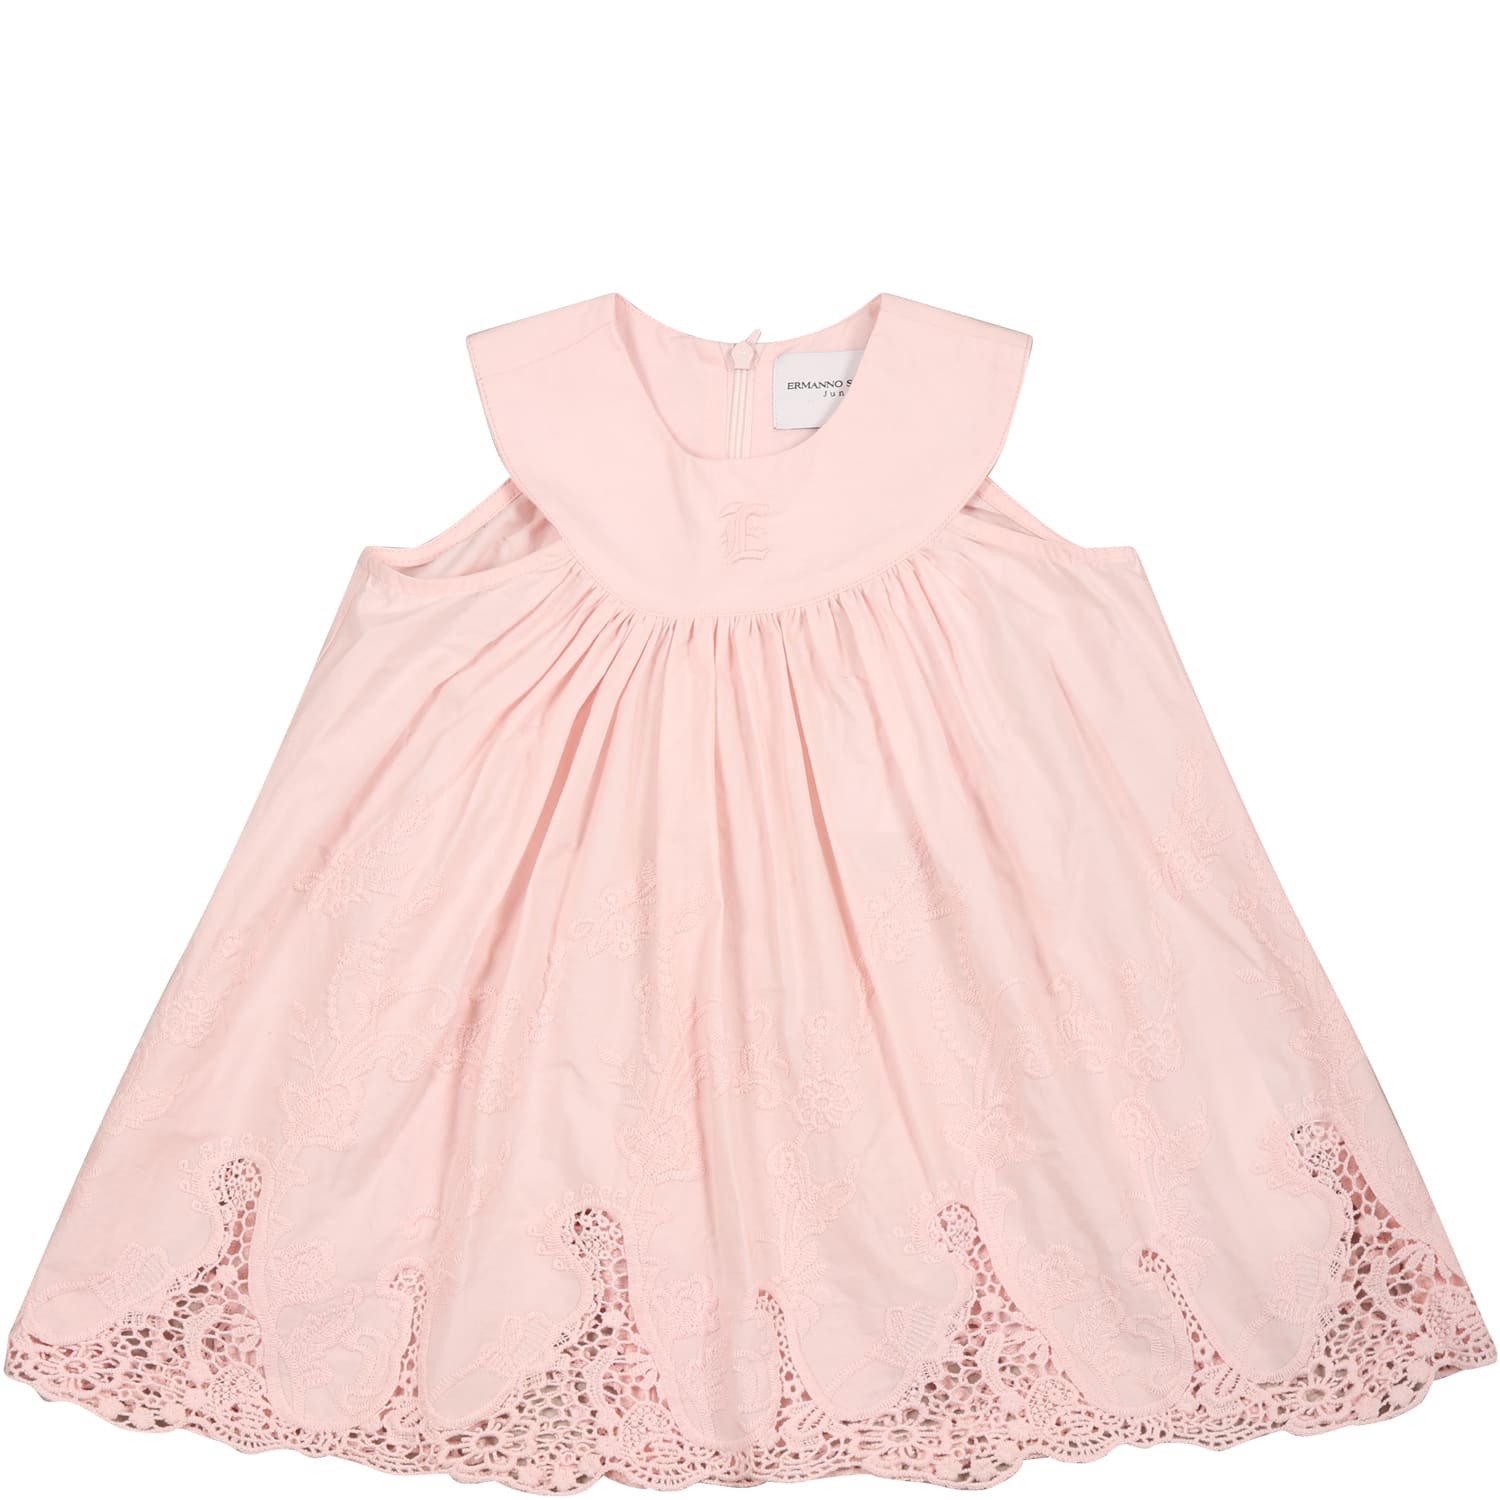 ERMANNO SCERVINO JUNIOR PINK DRESS FOR BABY GIRL WITH LOGO